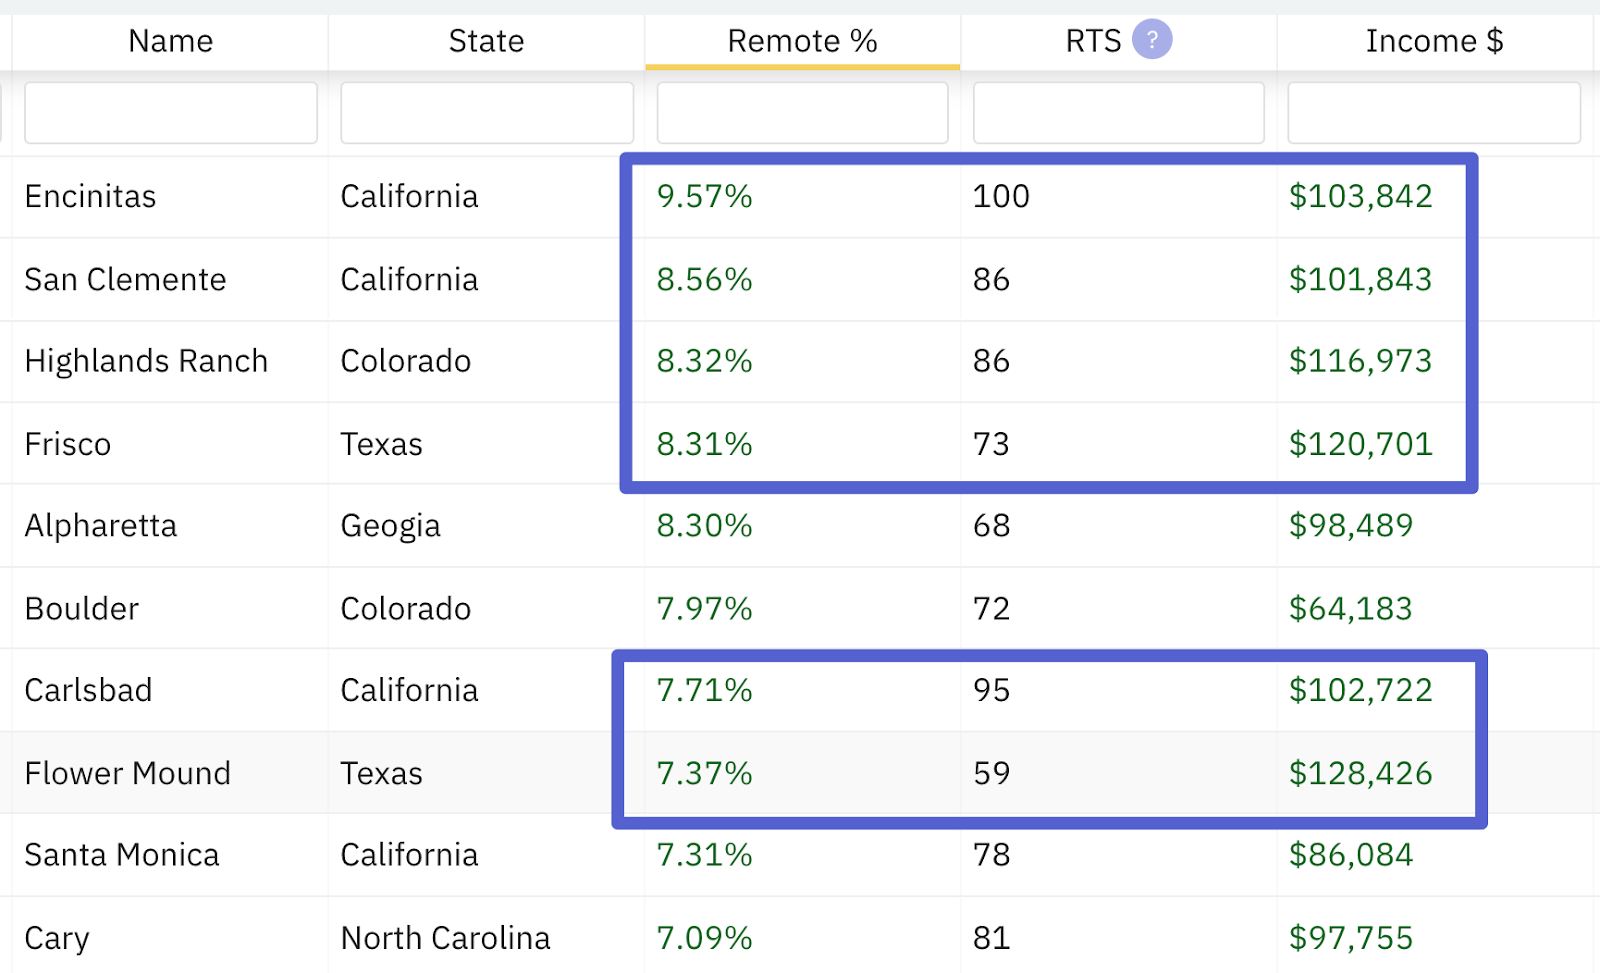 Top remote cities with income above $100,000